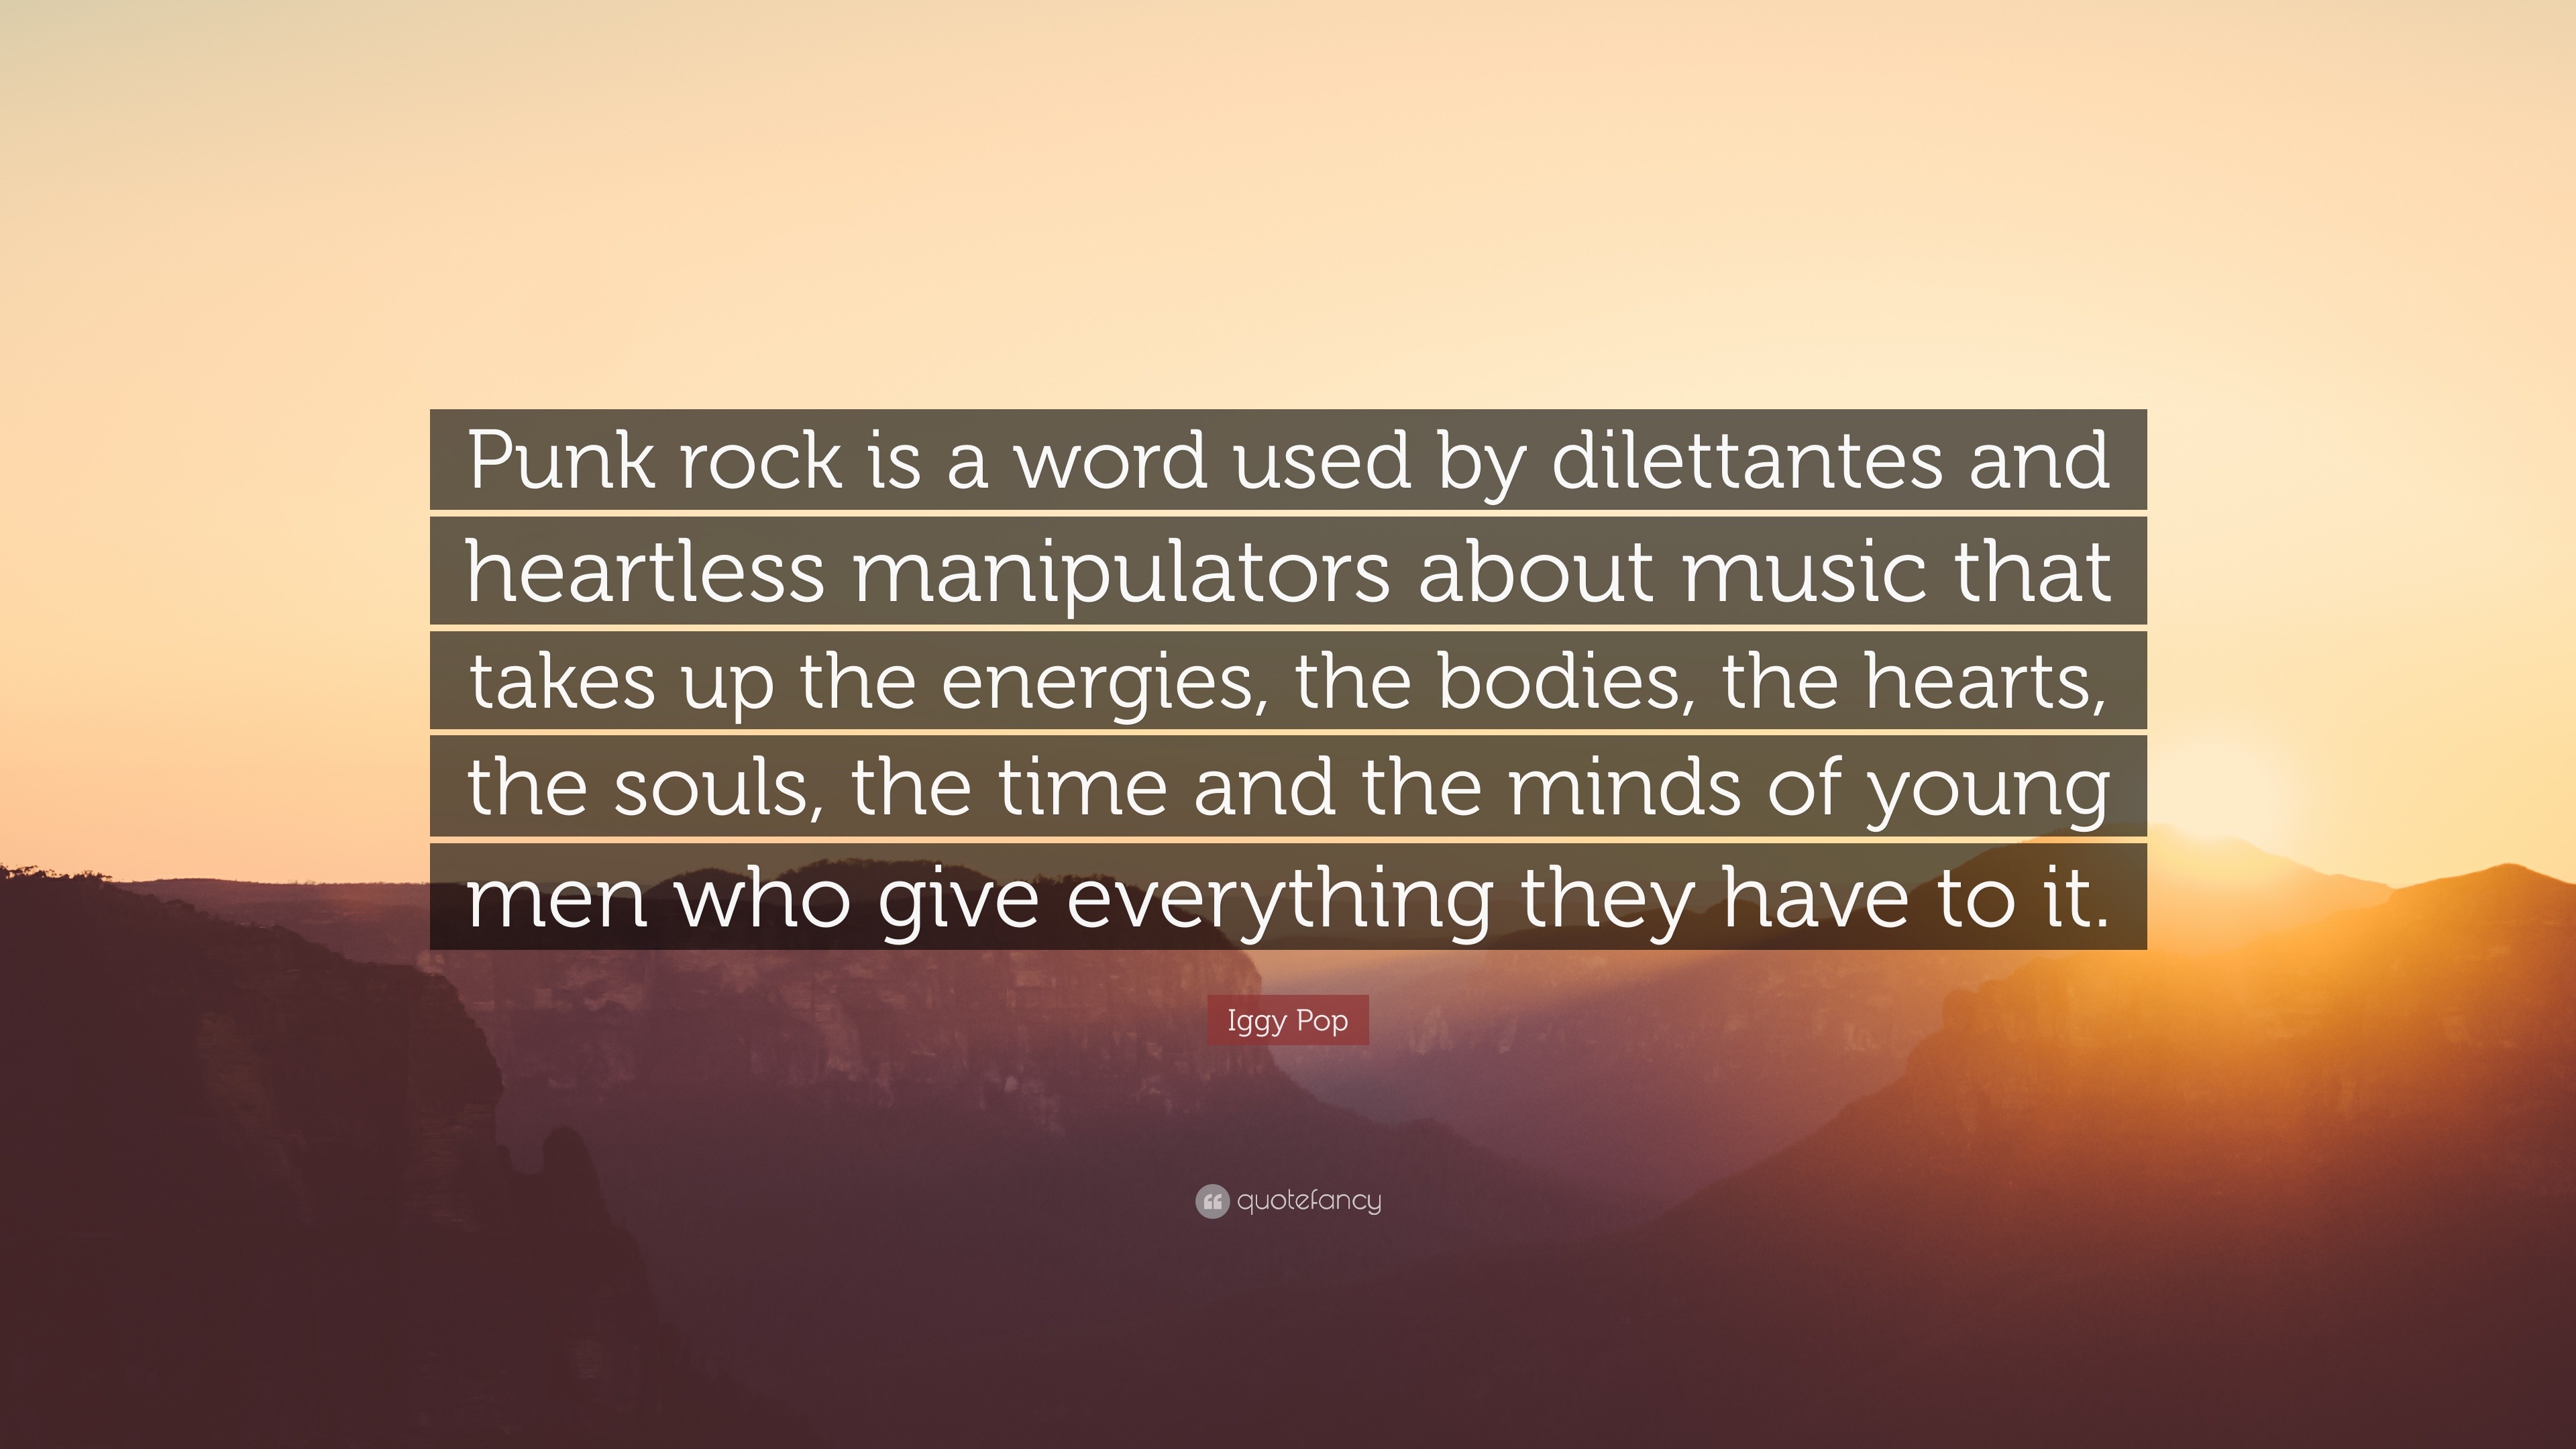 Iggy Pop Quote: “Punk rock is word used by dilettantes and heartless manipulators about music that takes up the energies, the bodies, t...”